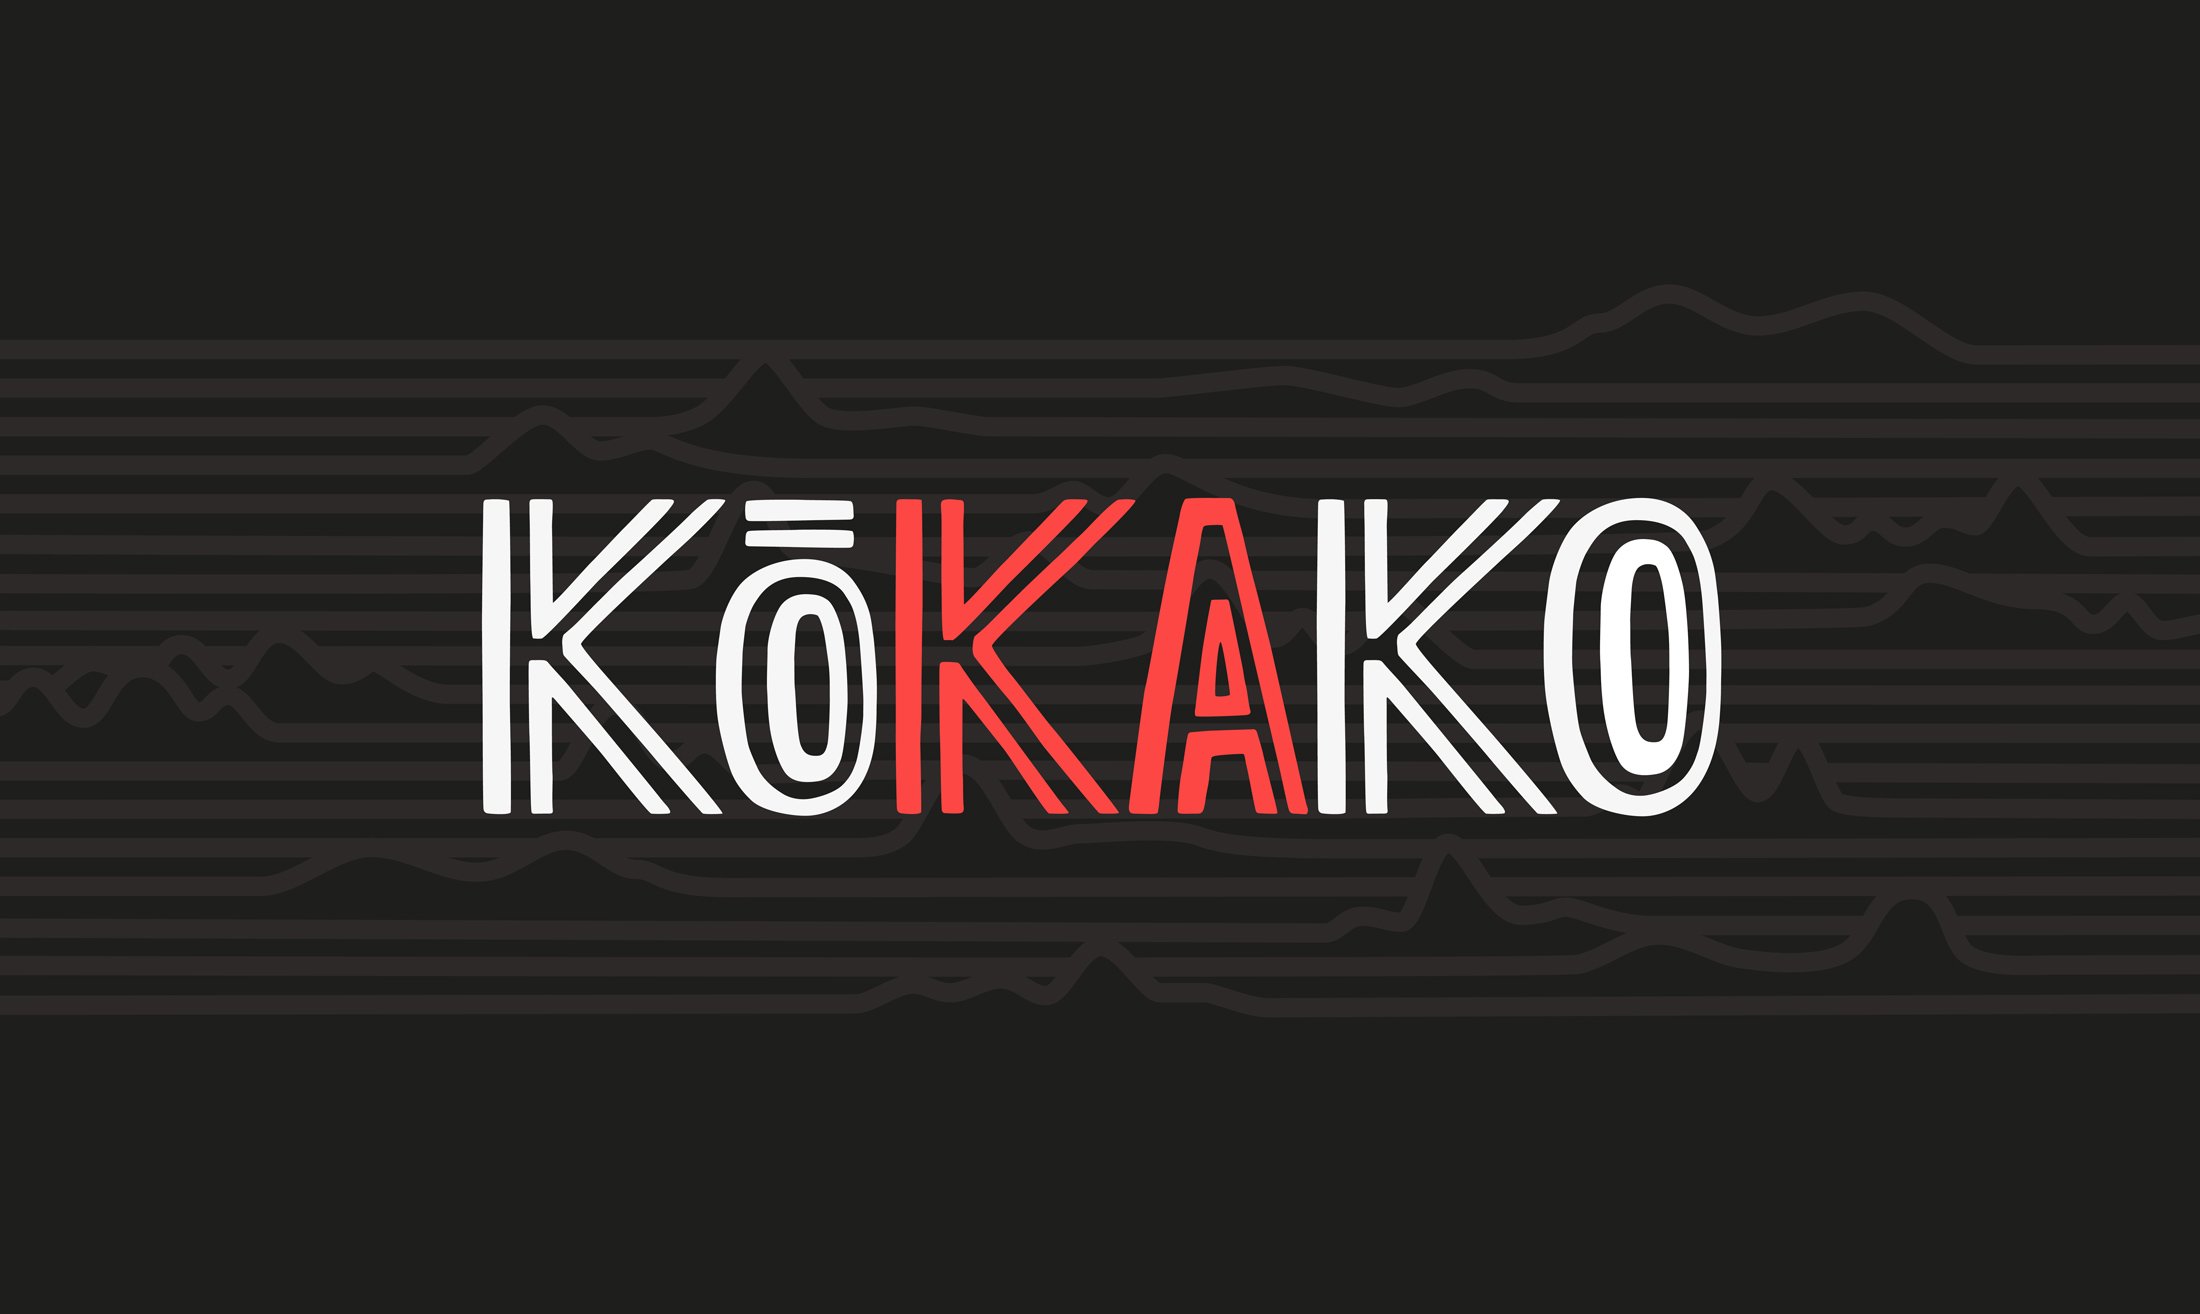  Kokako is an intuitive app that visually tracks the use of Māori language over the radio. The design won a Purple Pin at Best Awards. 